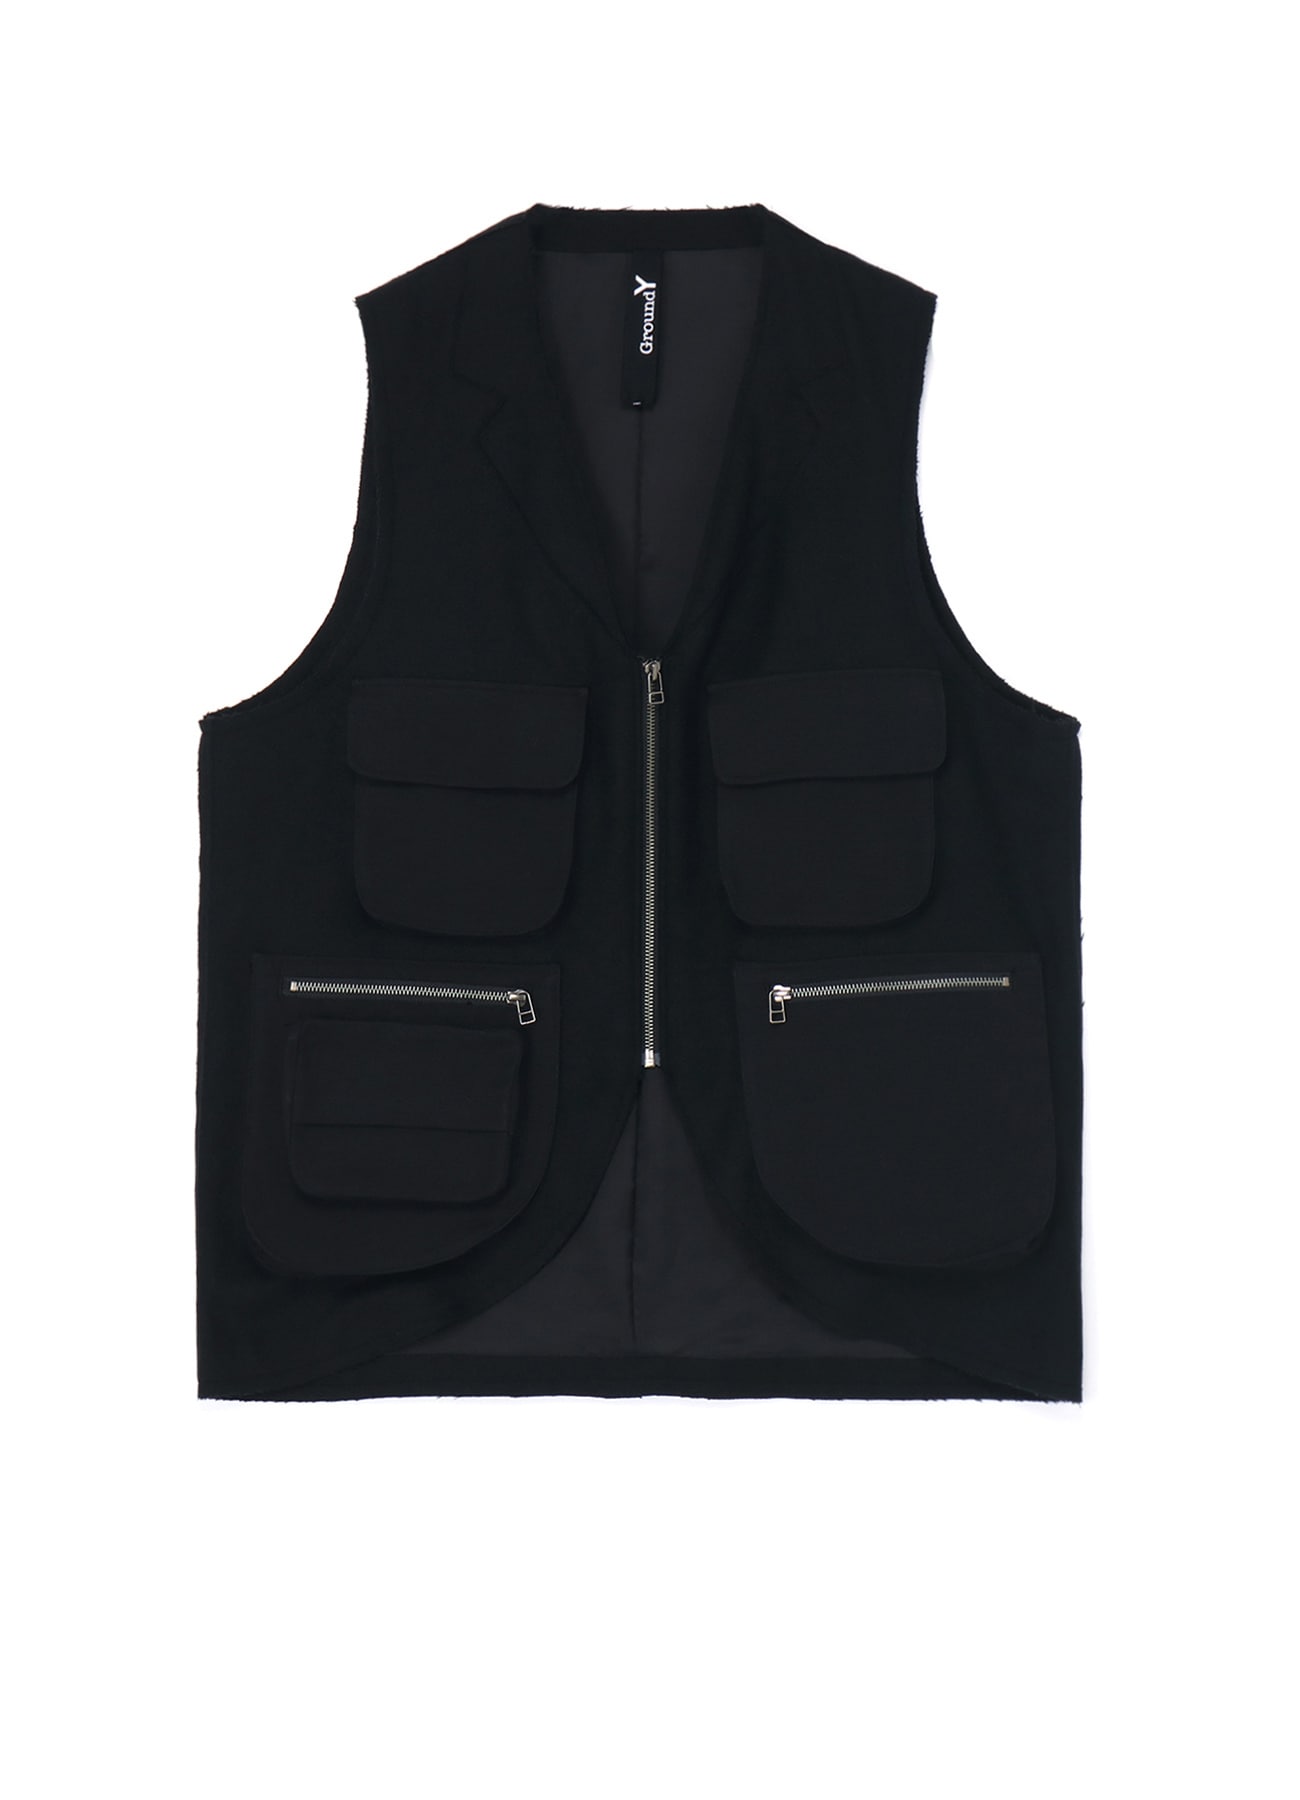 RECYCLED WOOL MELTON ILLUSIONISM OPEN COLLAR VEST